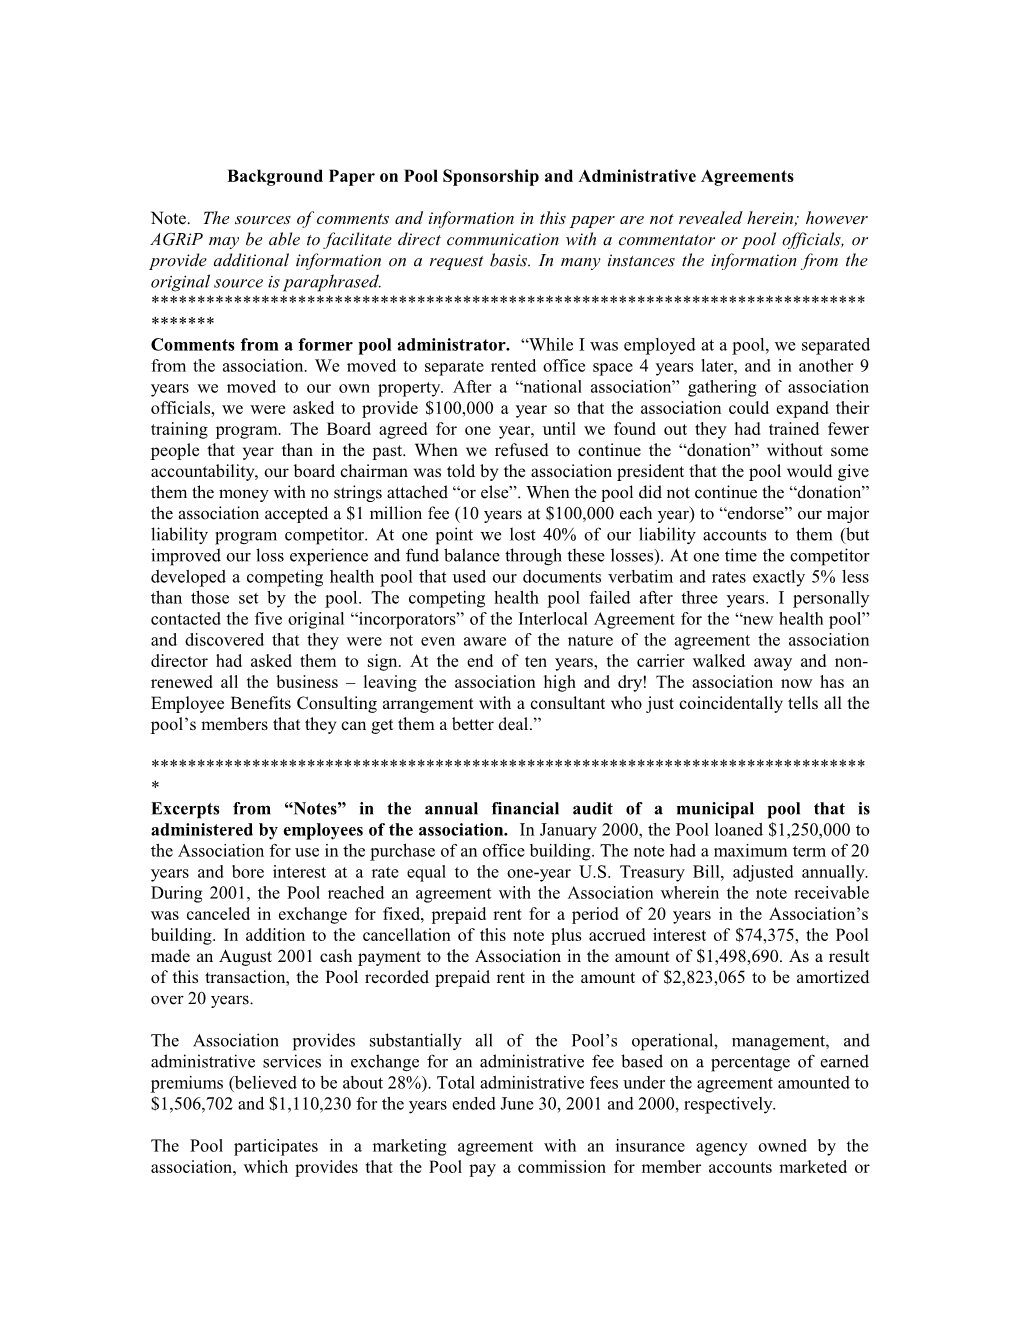 Background Paper on Pool Sponsorship and Administrative Agreements